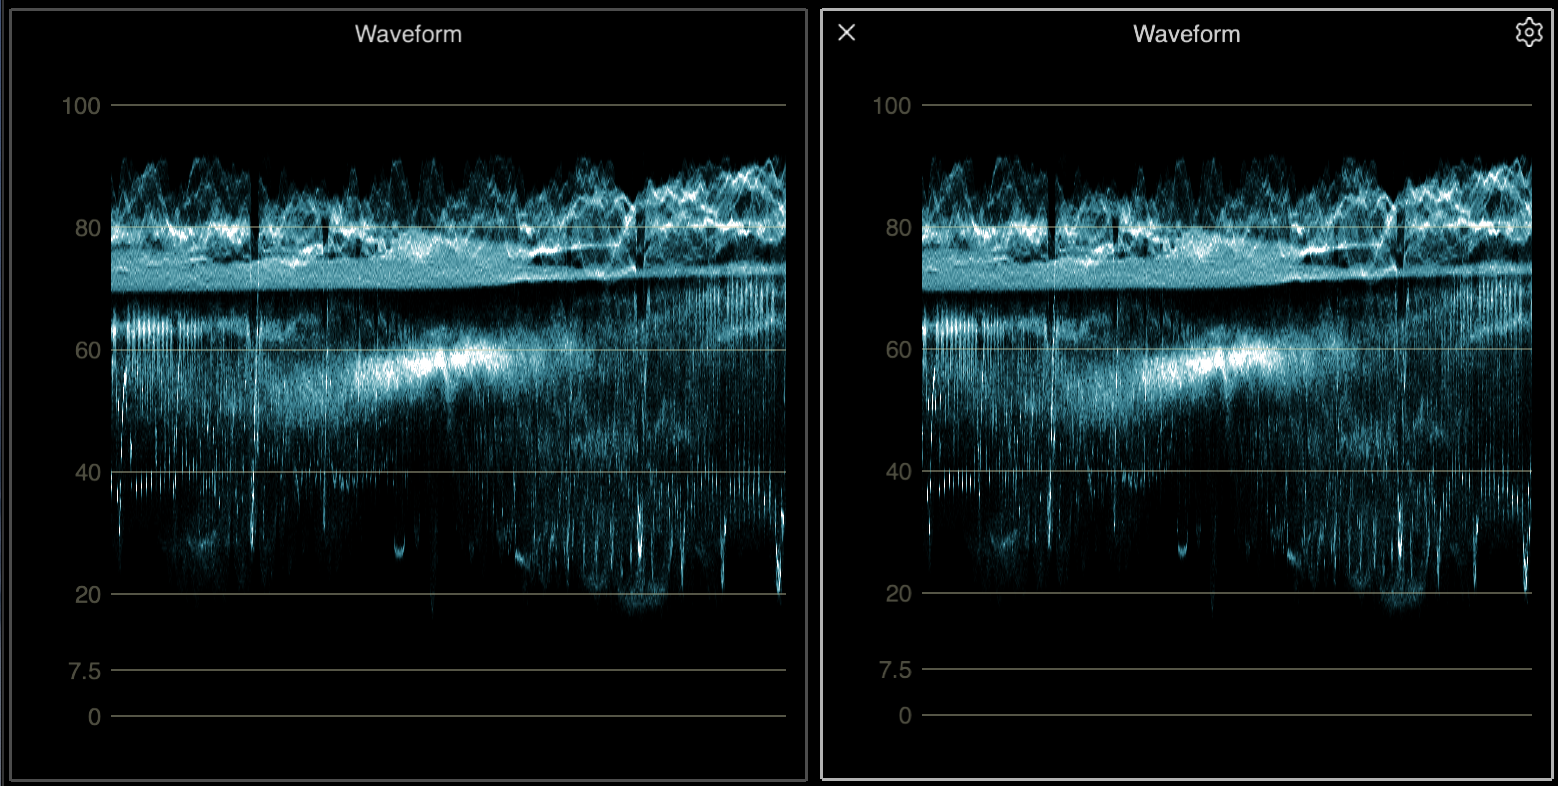 A waveform palette unselected (left) and selected (right)